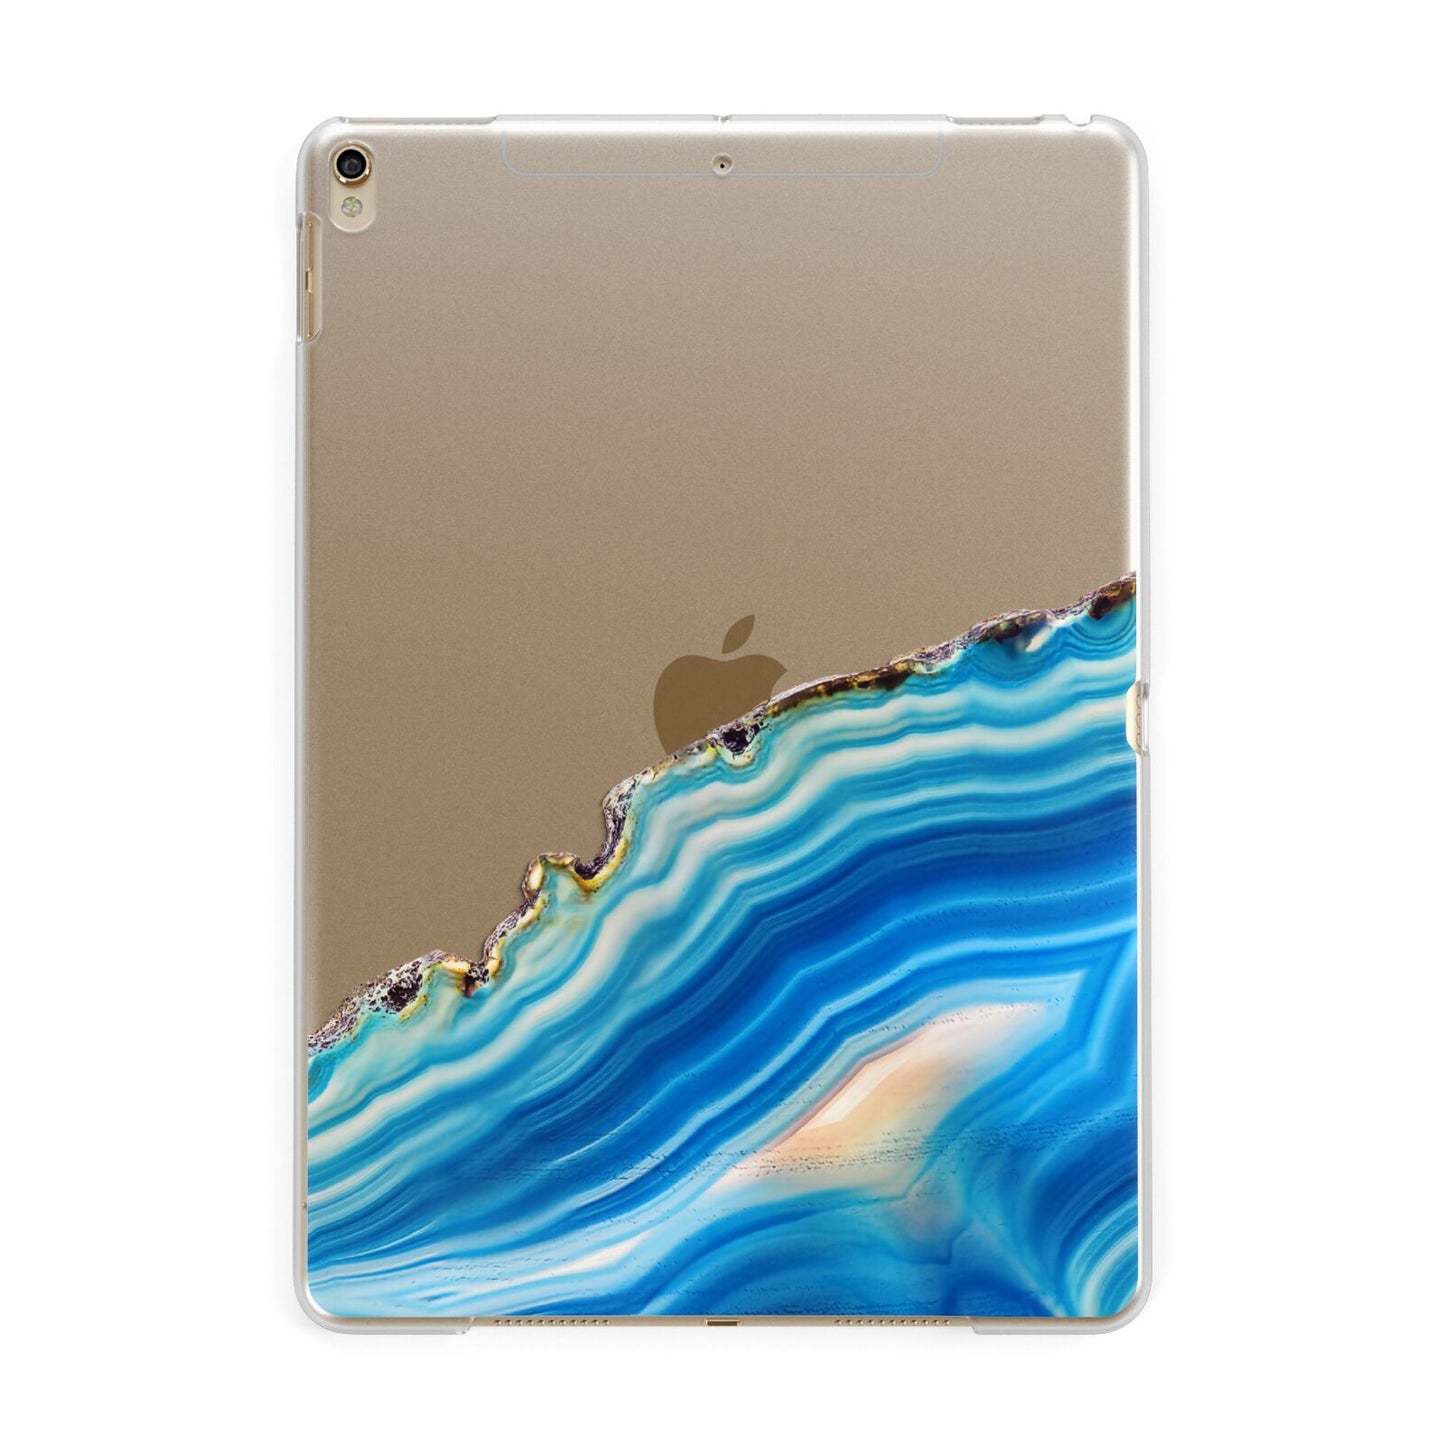 Agate Pale Blue and Bright Blue Apple iPad Gold Case